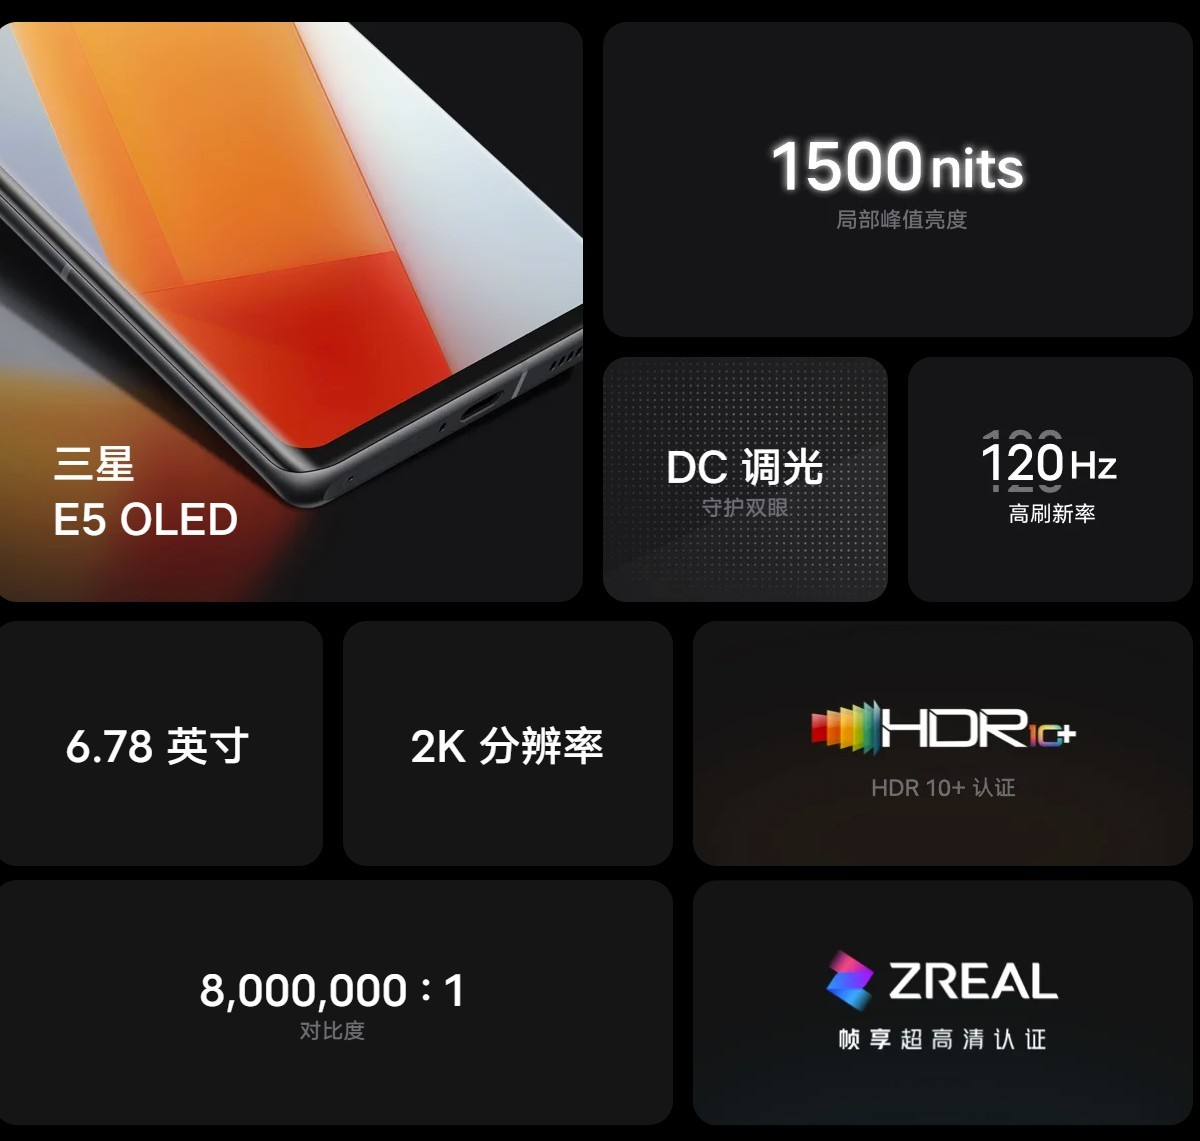 Iqoo 10 Pro Unveiled With 200W Fast Charging, Iqoo 10 Packs It With Sd 8+ Gen 1 Chip